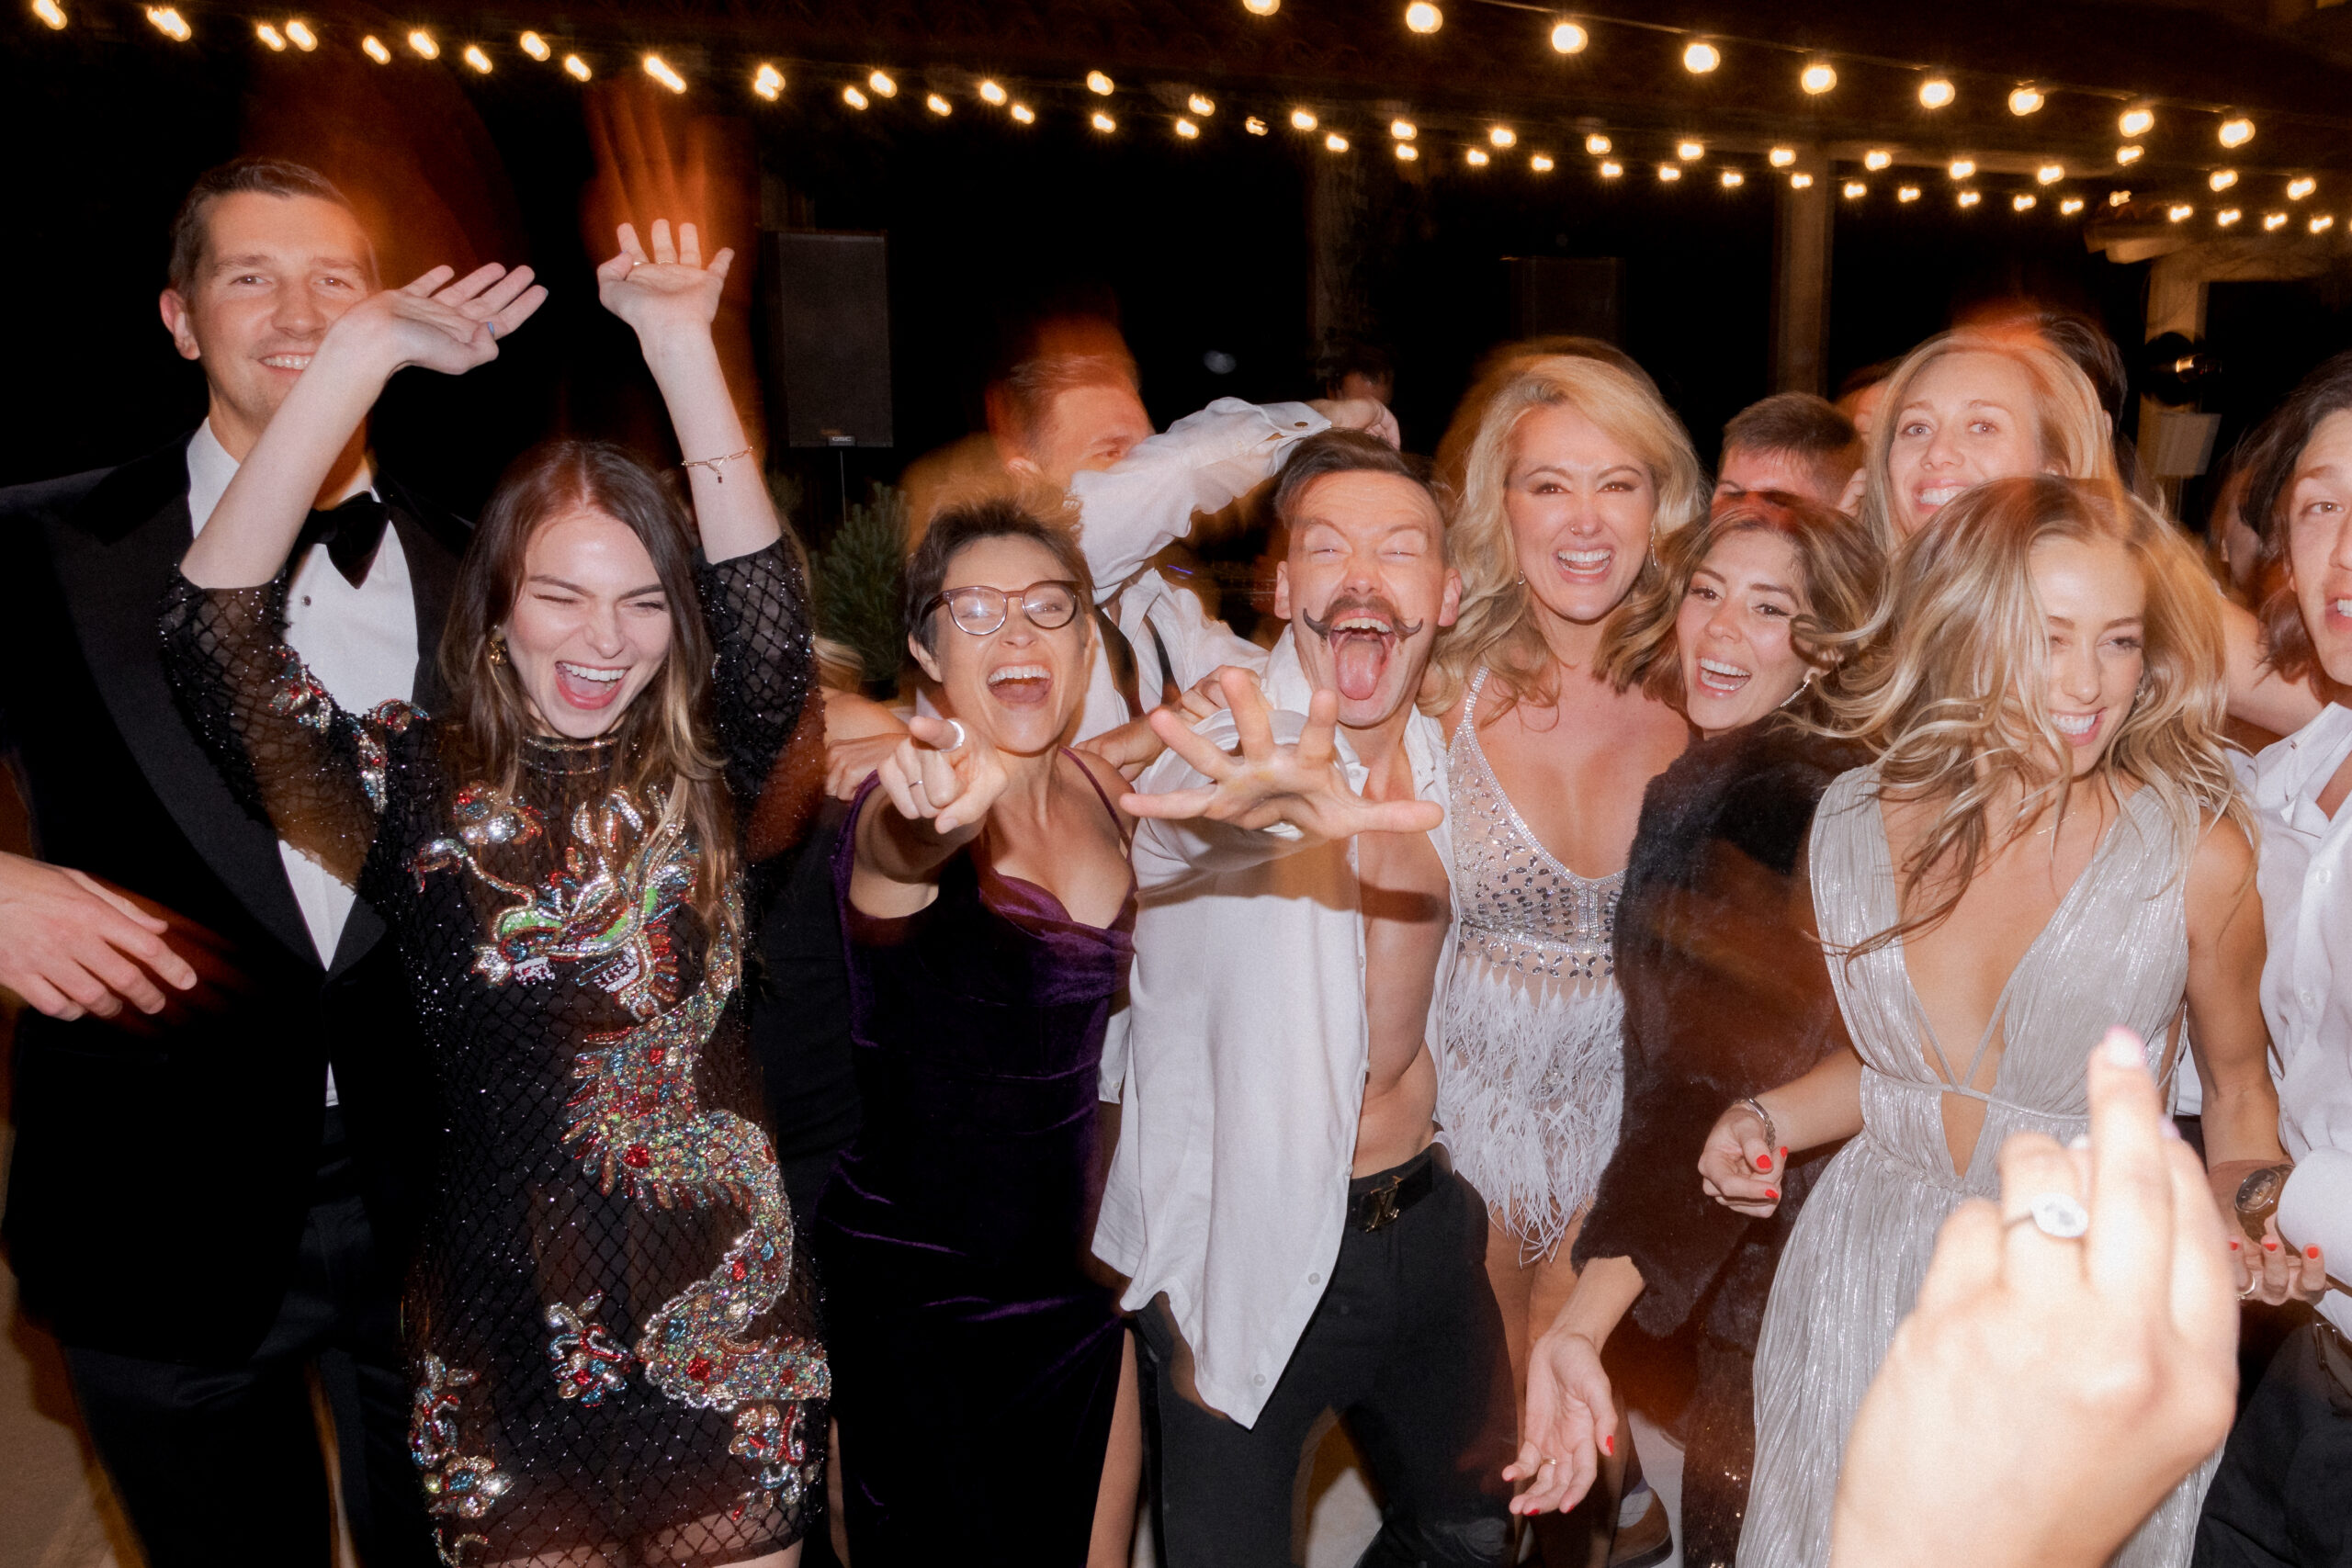 fun wedding reception dance floor photo of bride and groom and their friends laughing dancing and pointing at photographer